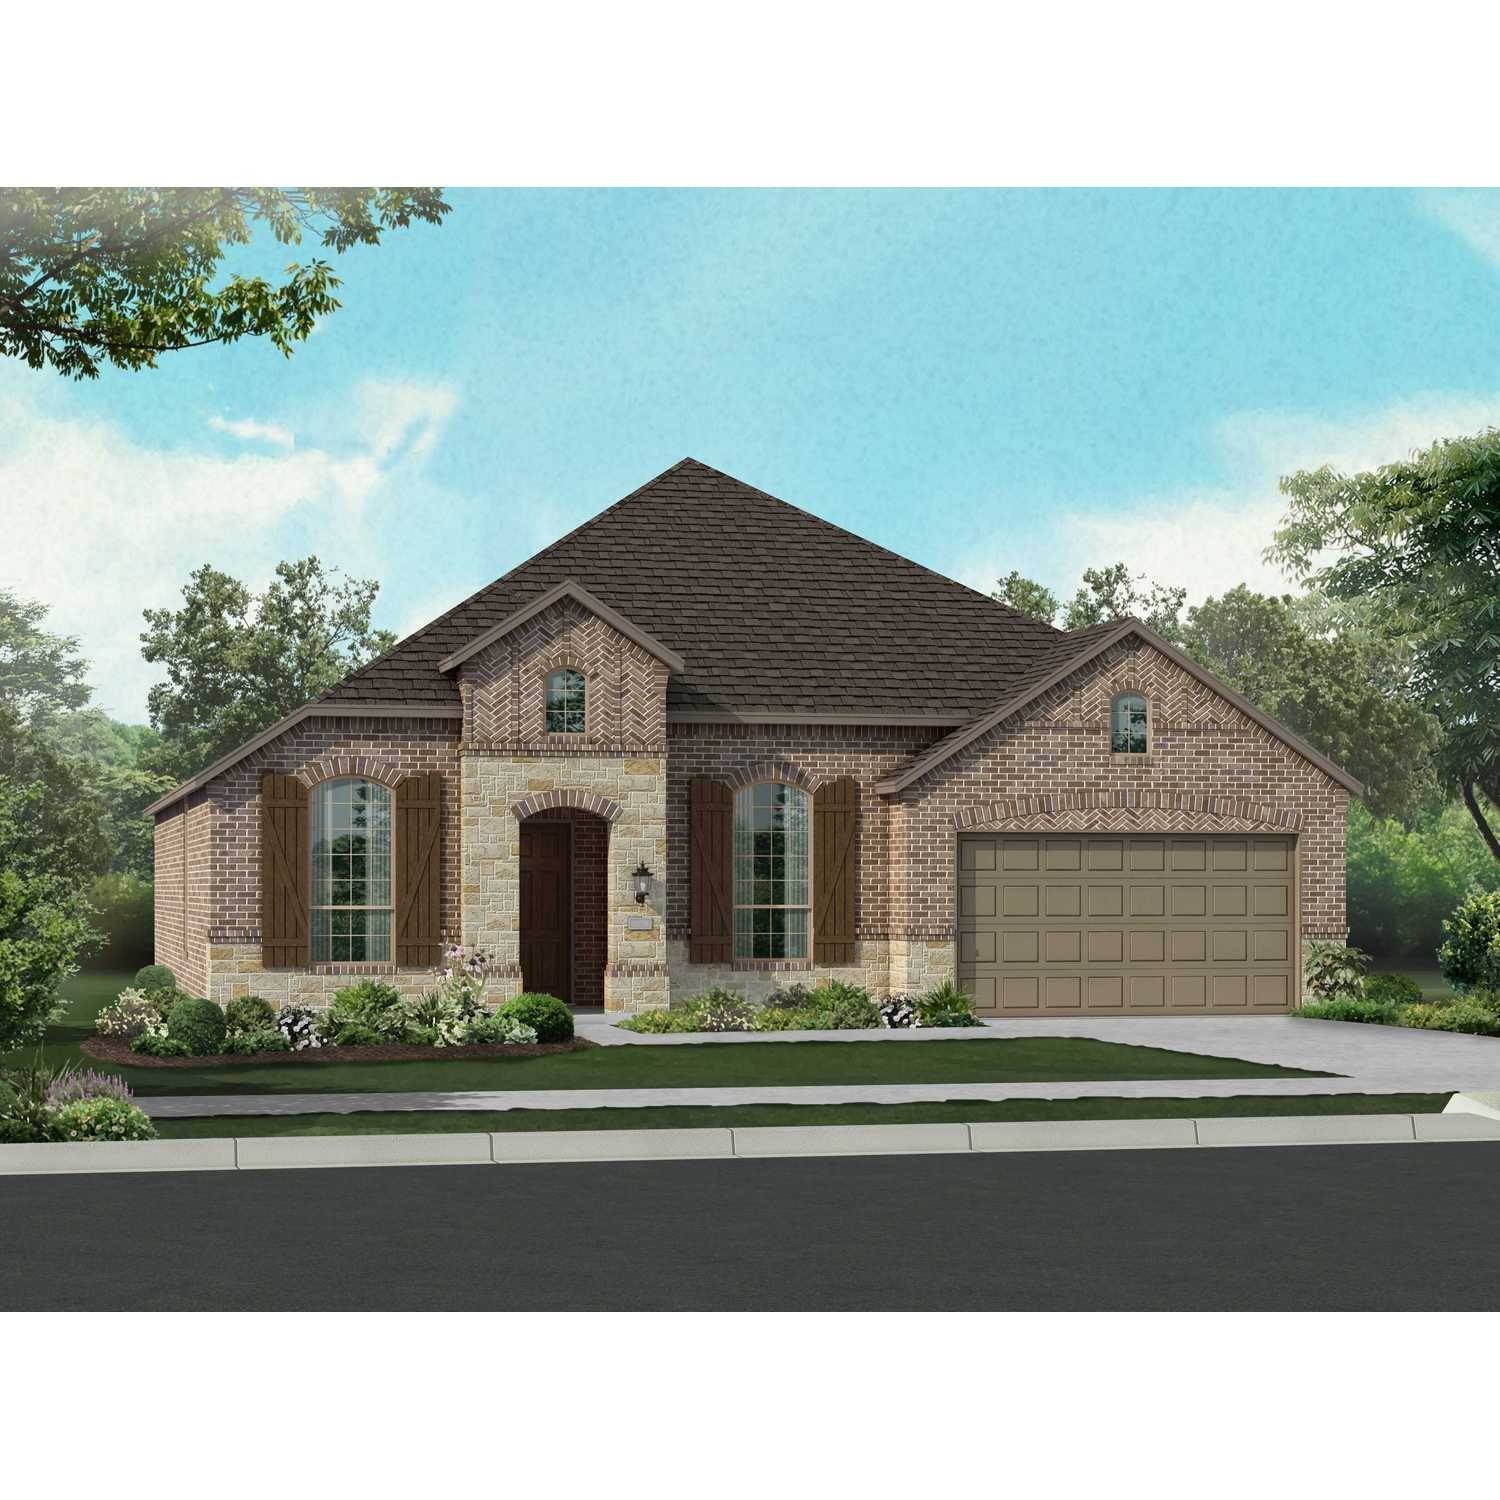 Single Family for Sale at Monterra: 70ft. Lots 1022 Monterra Way, Fate, TX 75087